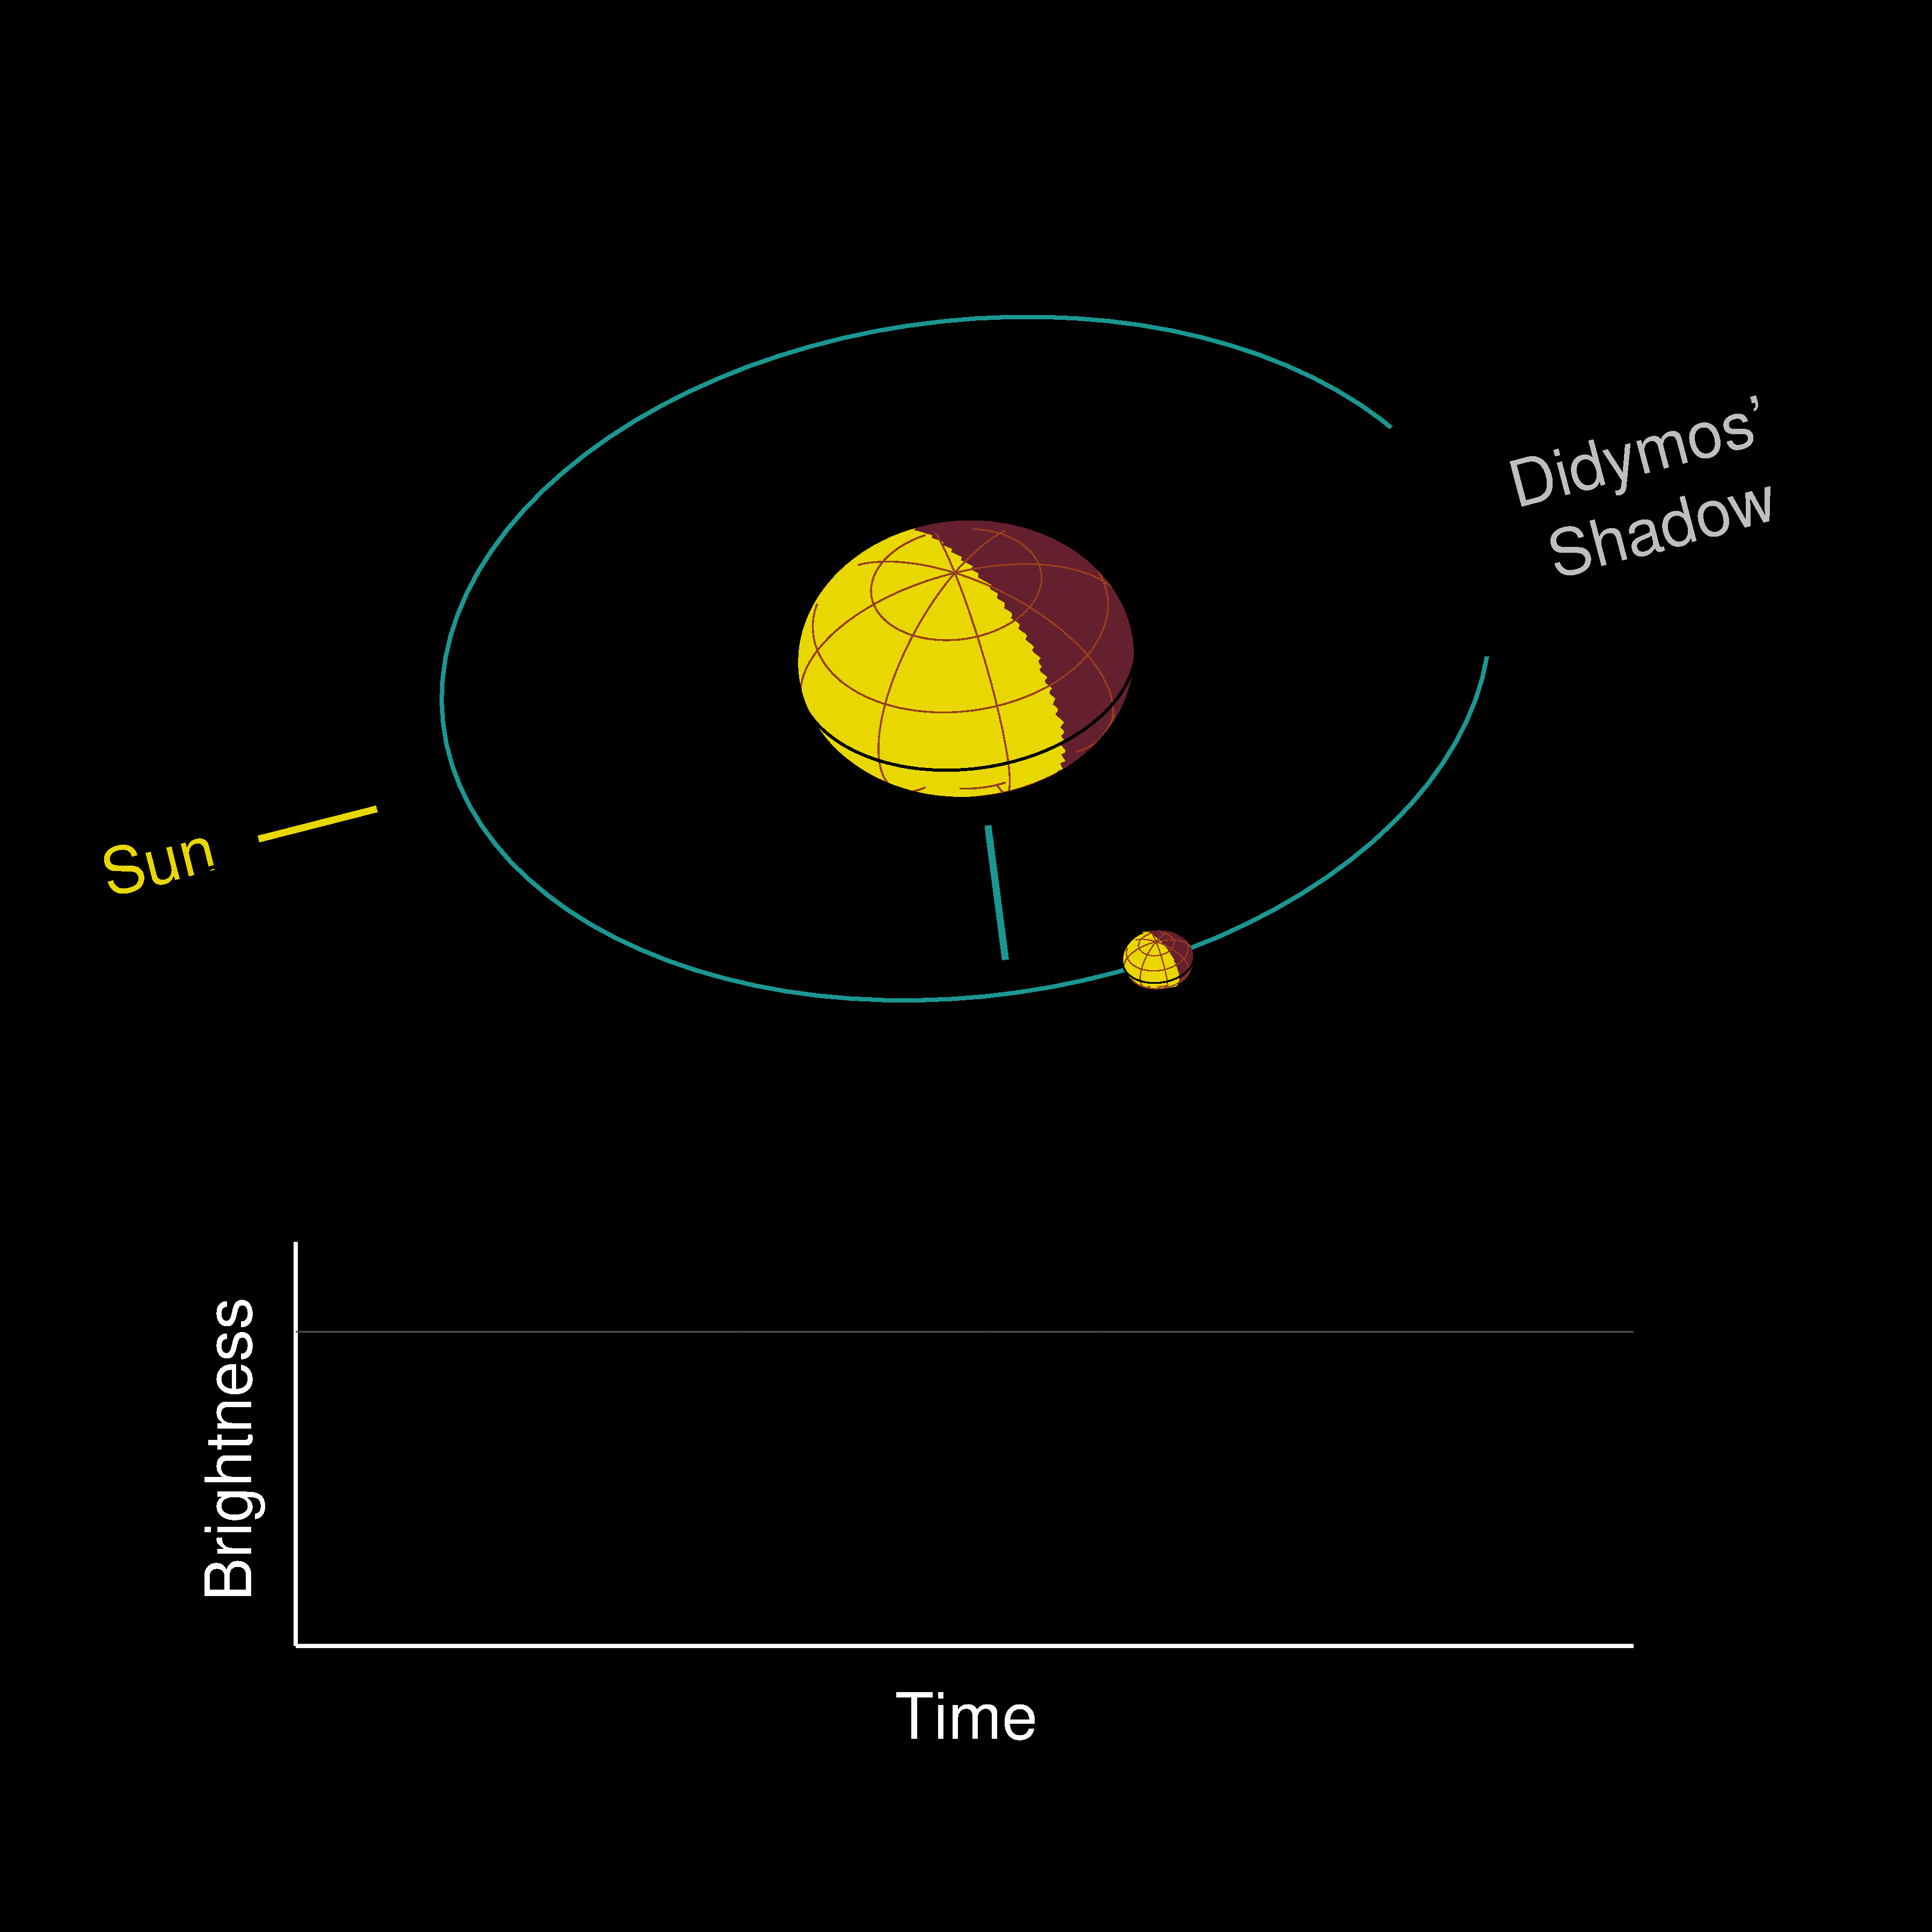 This animation showing a highly magnified view of how Dimorphos’ orbit around Didymos is seen from Earth, approximately one week after the DART impact.